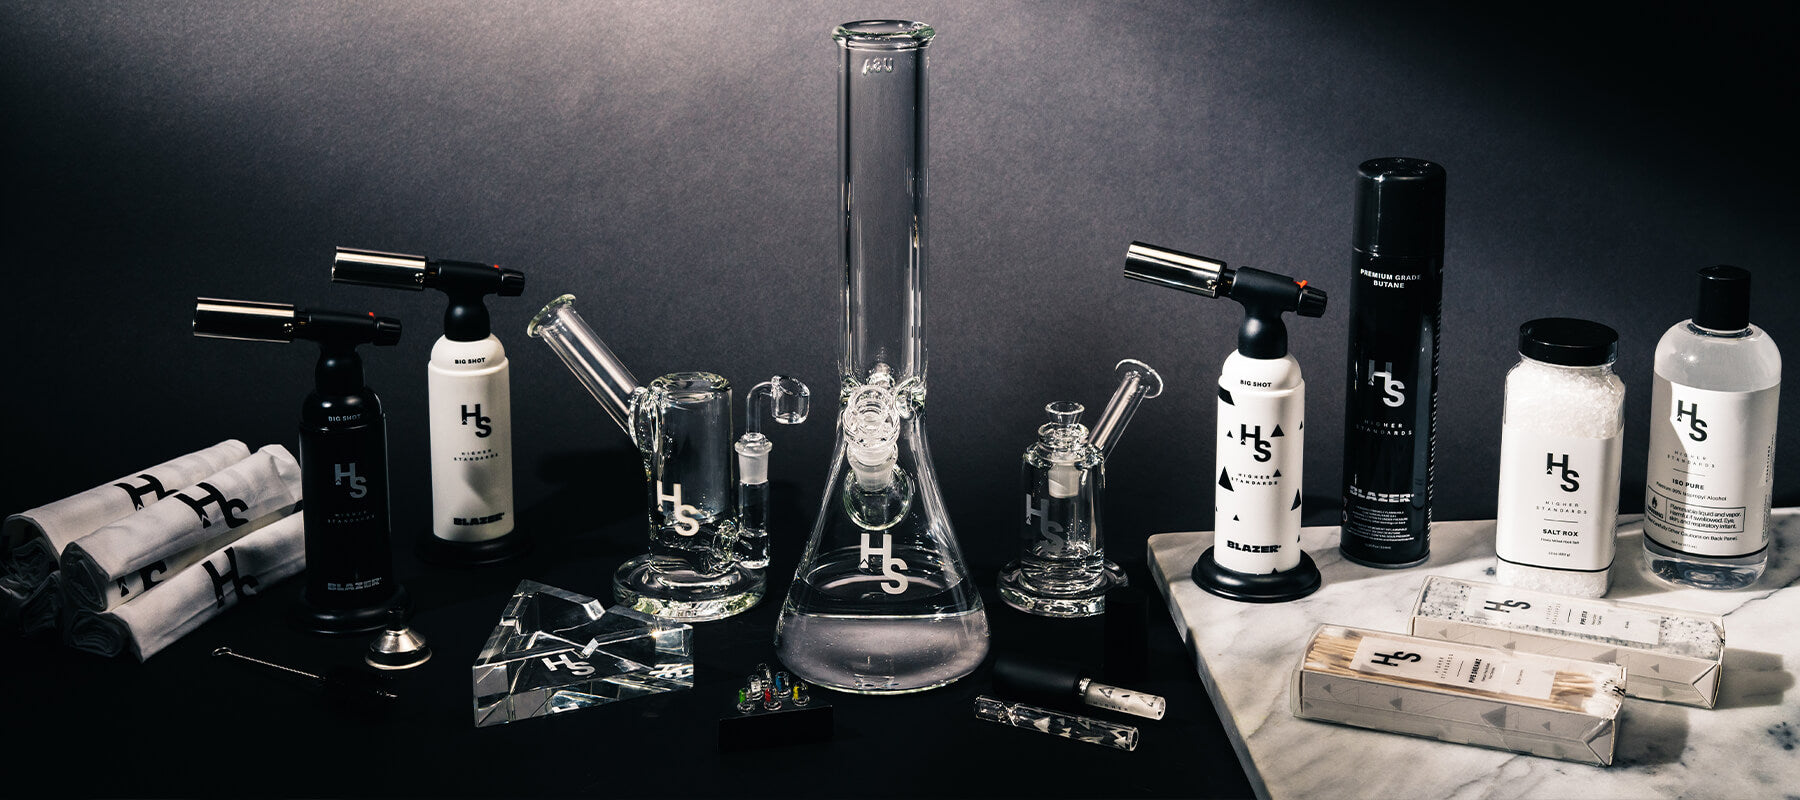 All the best accessories for headshop: bongs, water pipes, spoon pipes, bubbler, steamroller and grinders